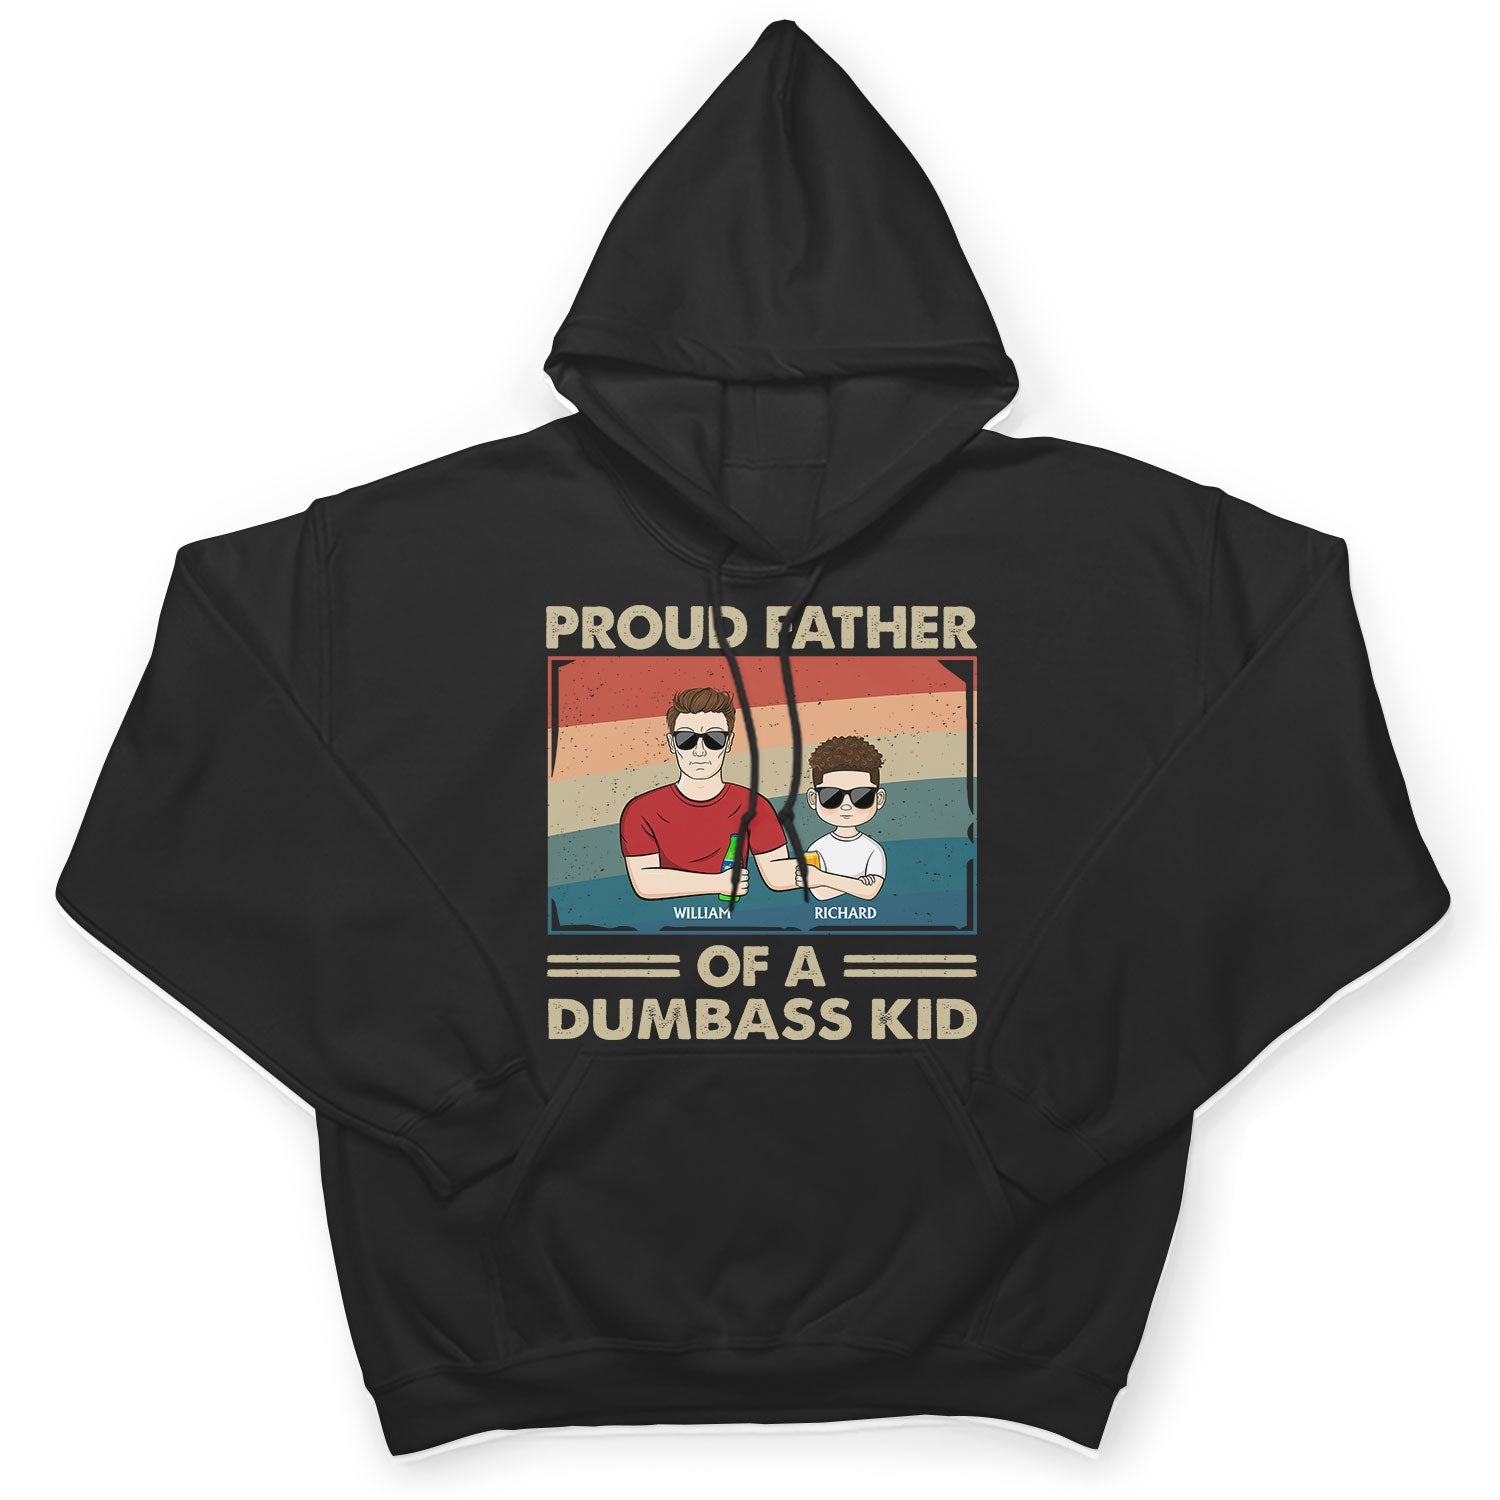 Proud Father Of A Few Kids - Funny Gift For Dad, Father, Grandpa - Personalized Hoodie